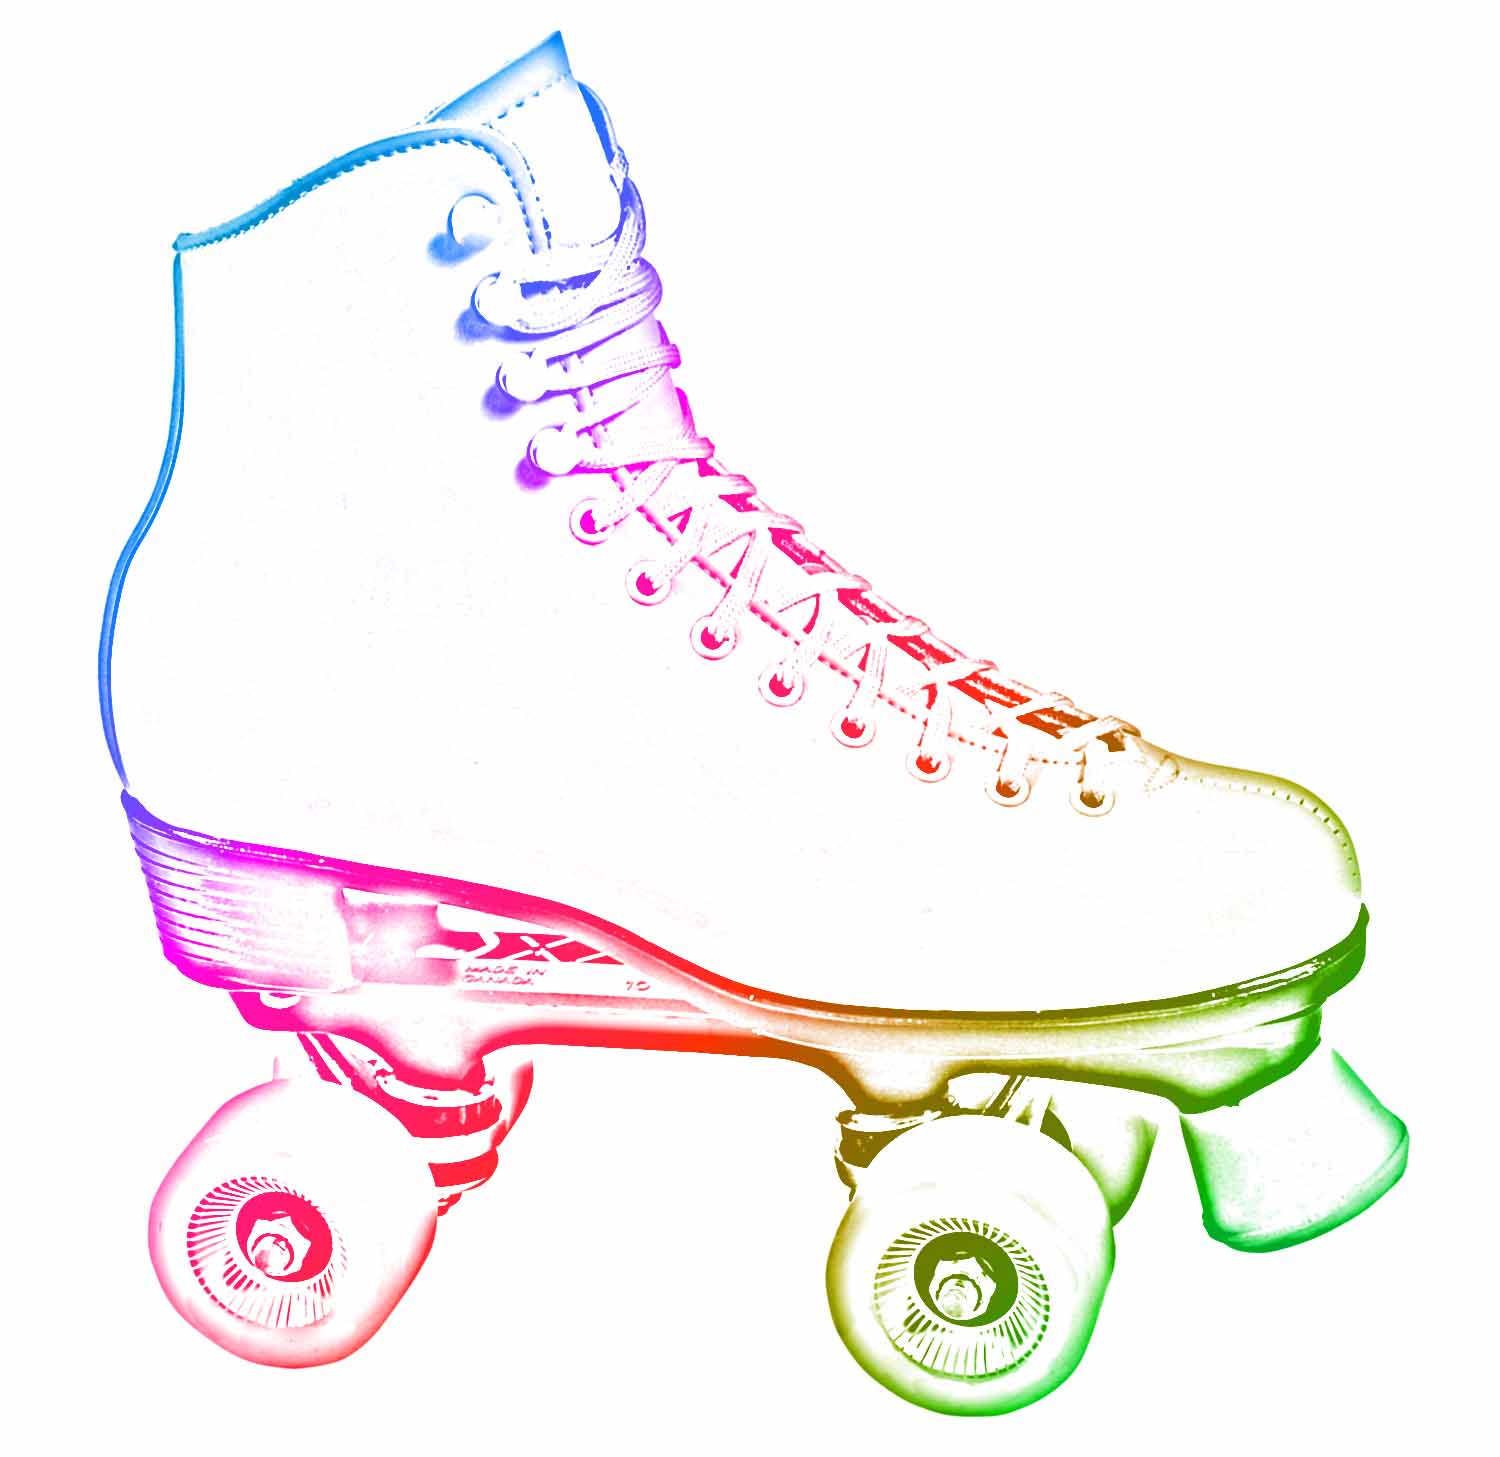 roller disco music image search results